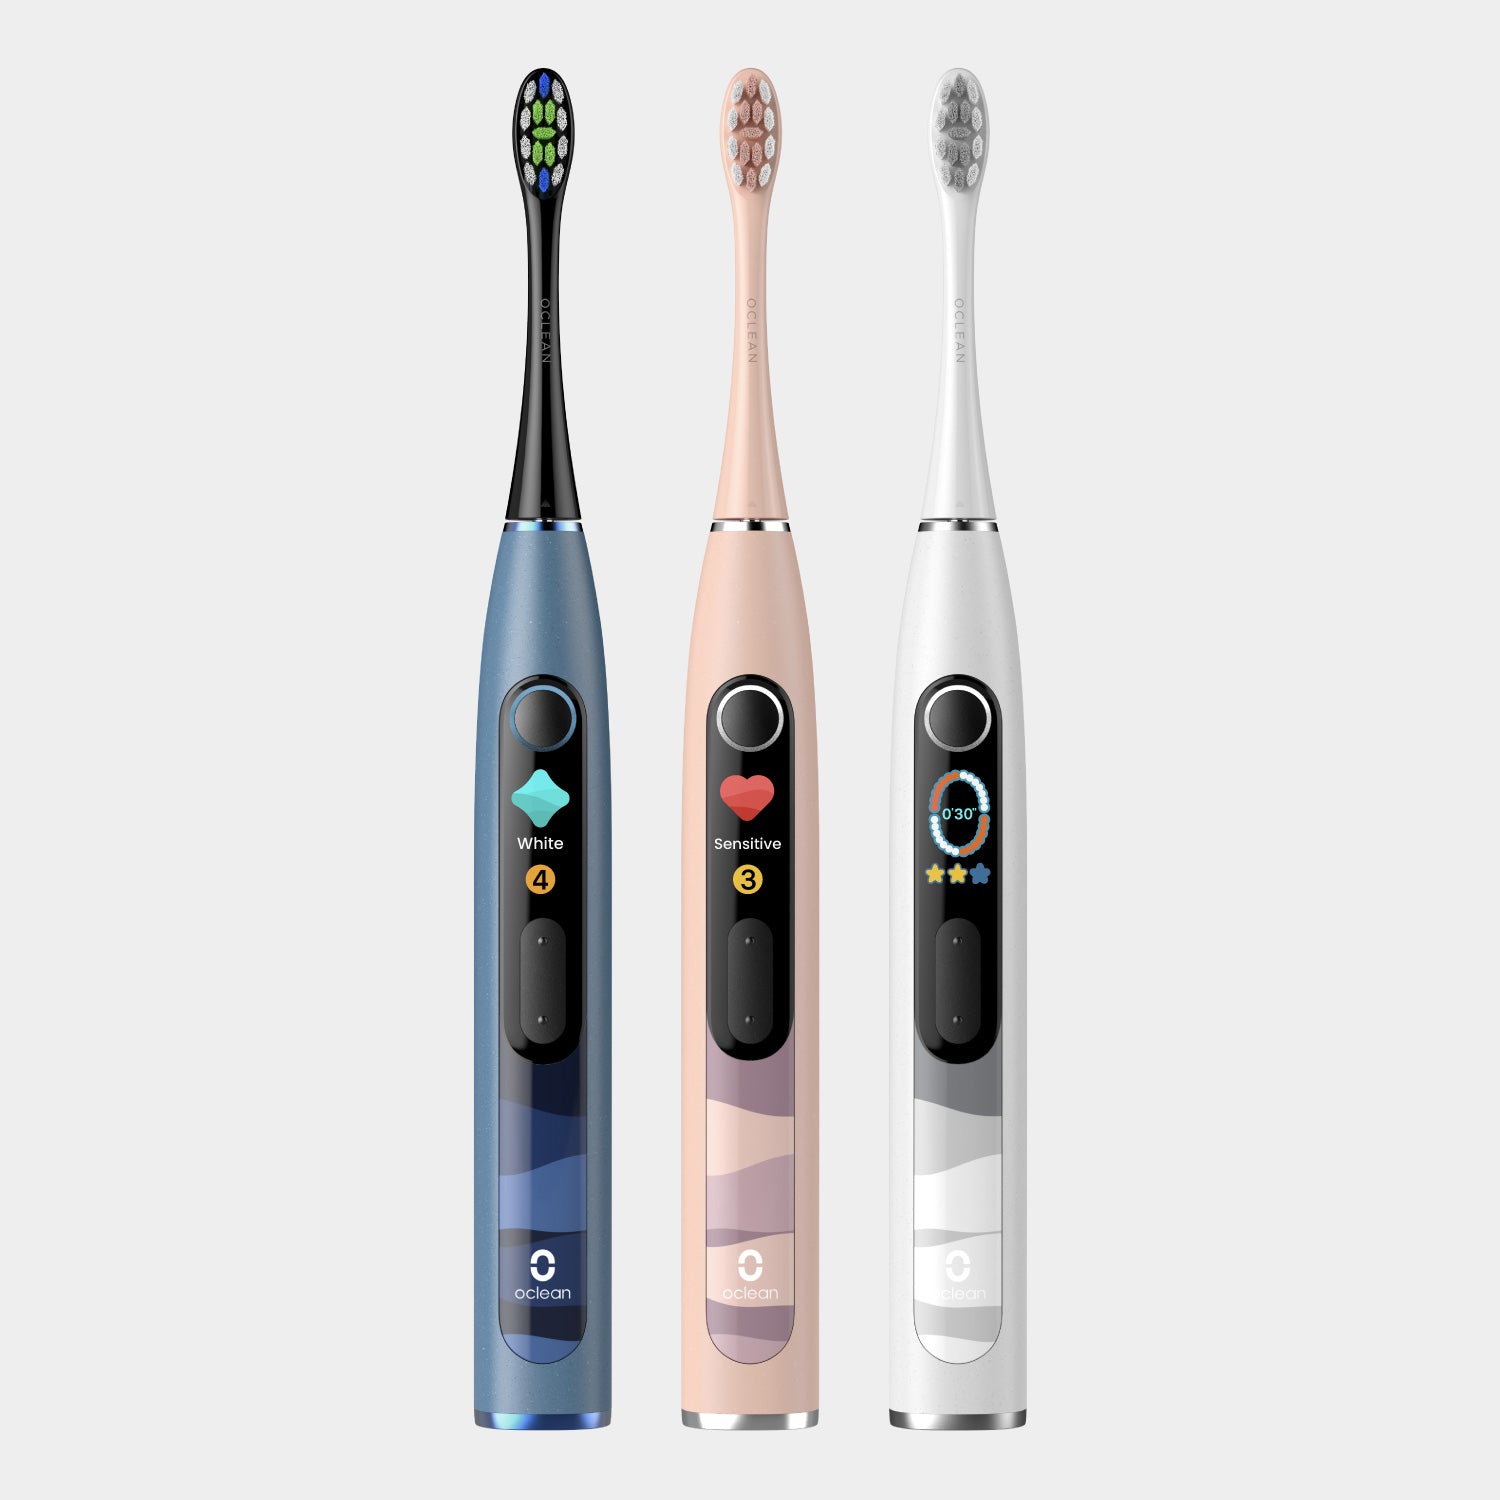 Oclean X 10 Sonic Electric Toothbrush-Toothbrushes-Oclean US Store